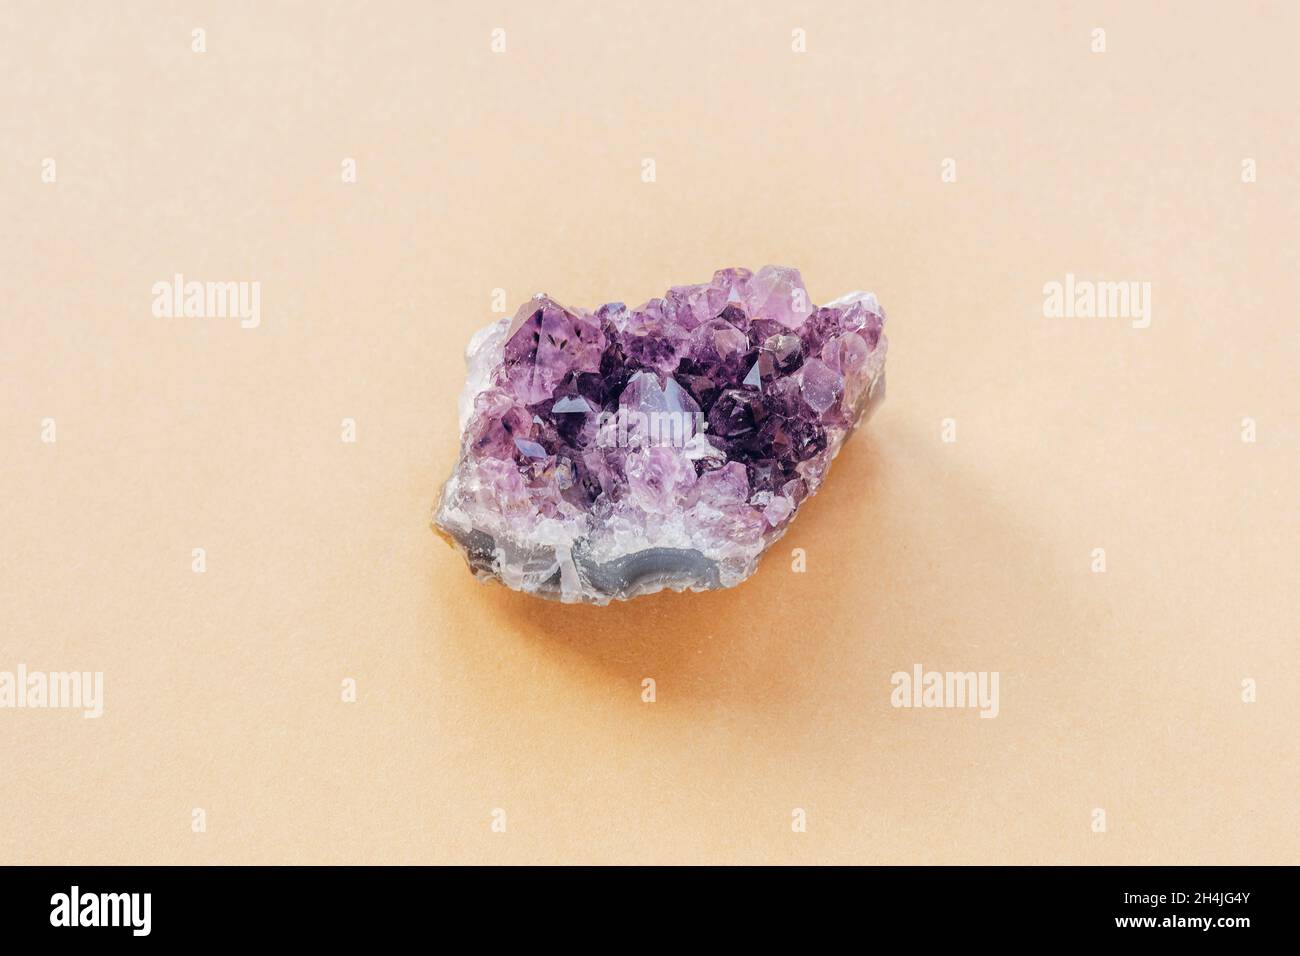 Purple amethyst crystal on a light beige background, close up. Top view. Stock Photo